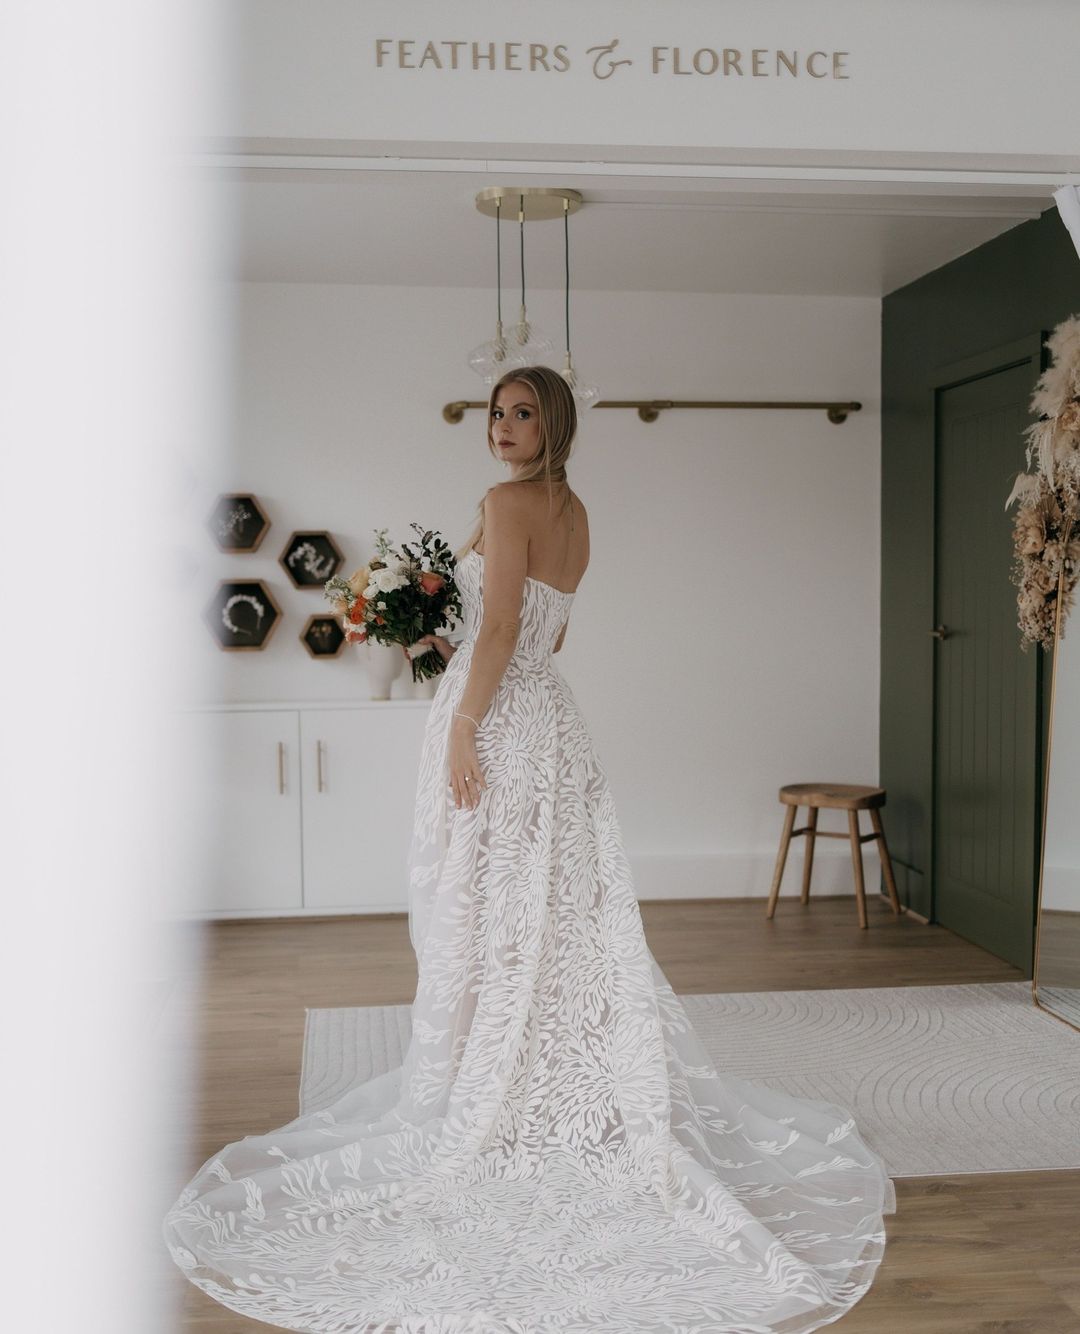 An A-Line silhouette with a straight, strapless neckline, Albina by Savin London.⁠ Feathers & Florence | Wedding Dress Preston